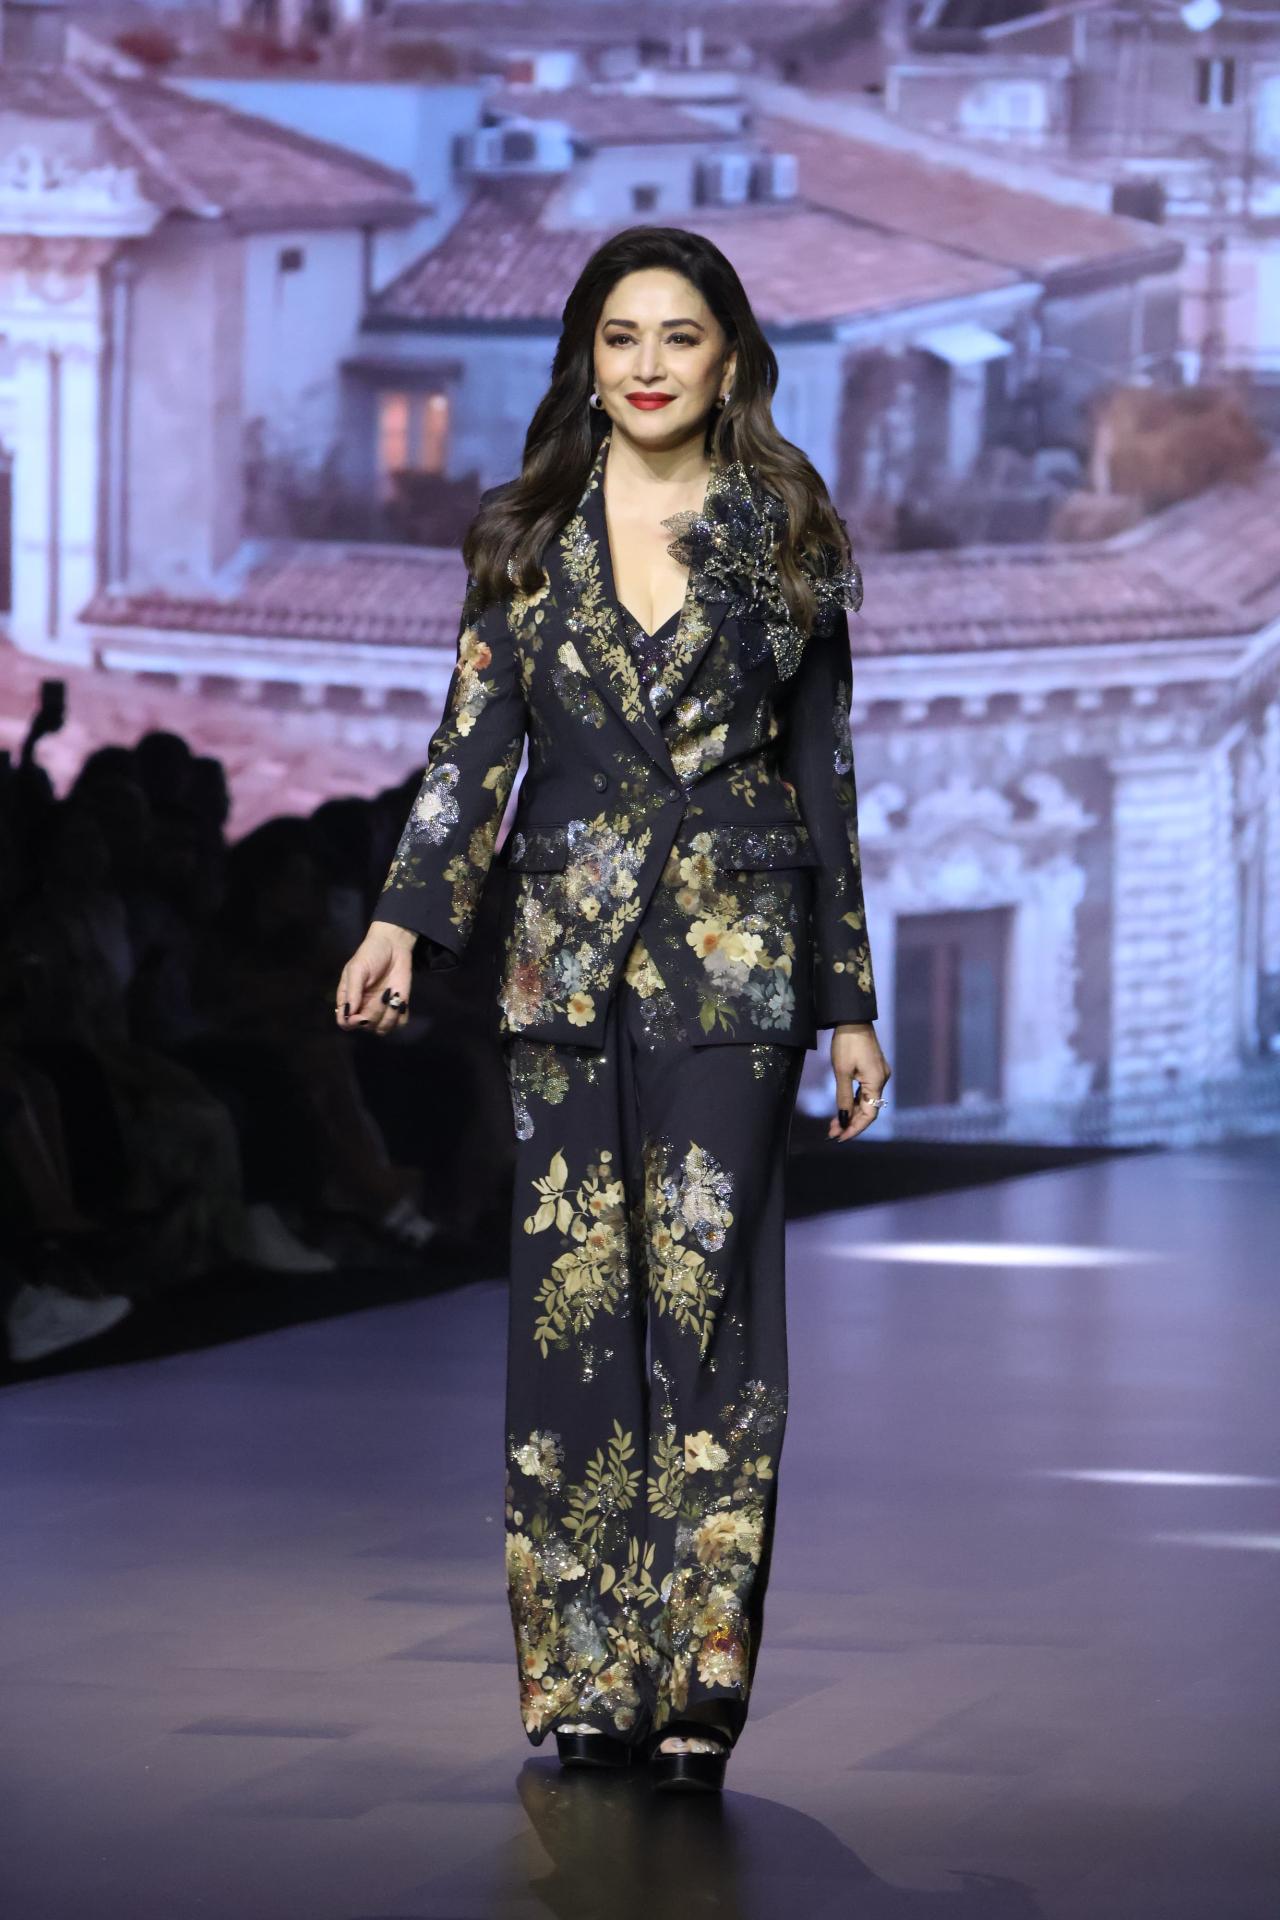 Madhuri Dixit embodied eternal elegance as she walked the ramp in this floral printed pant suit